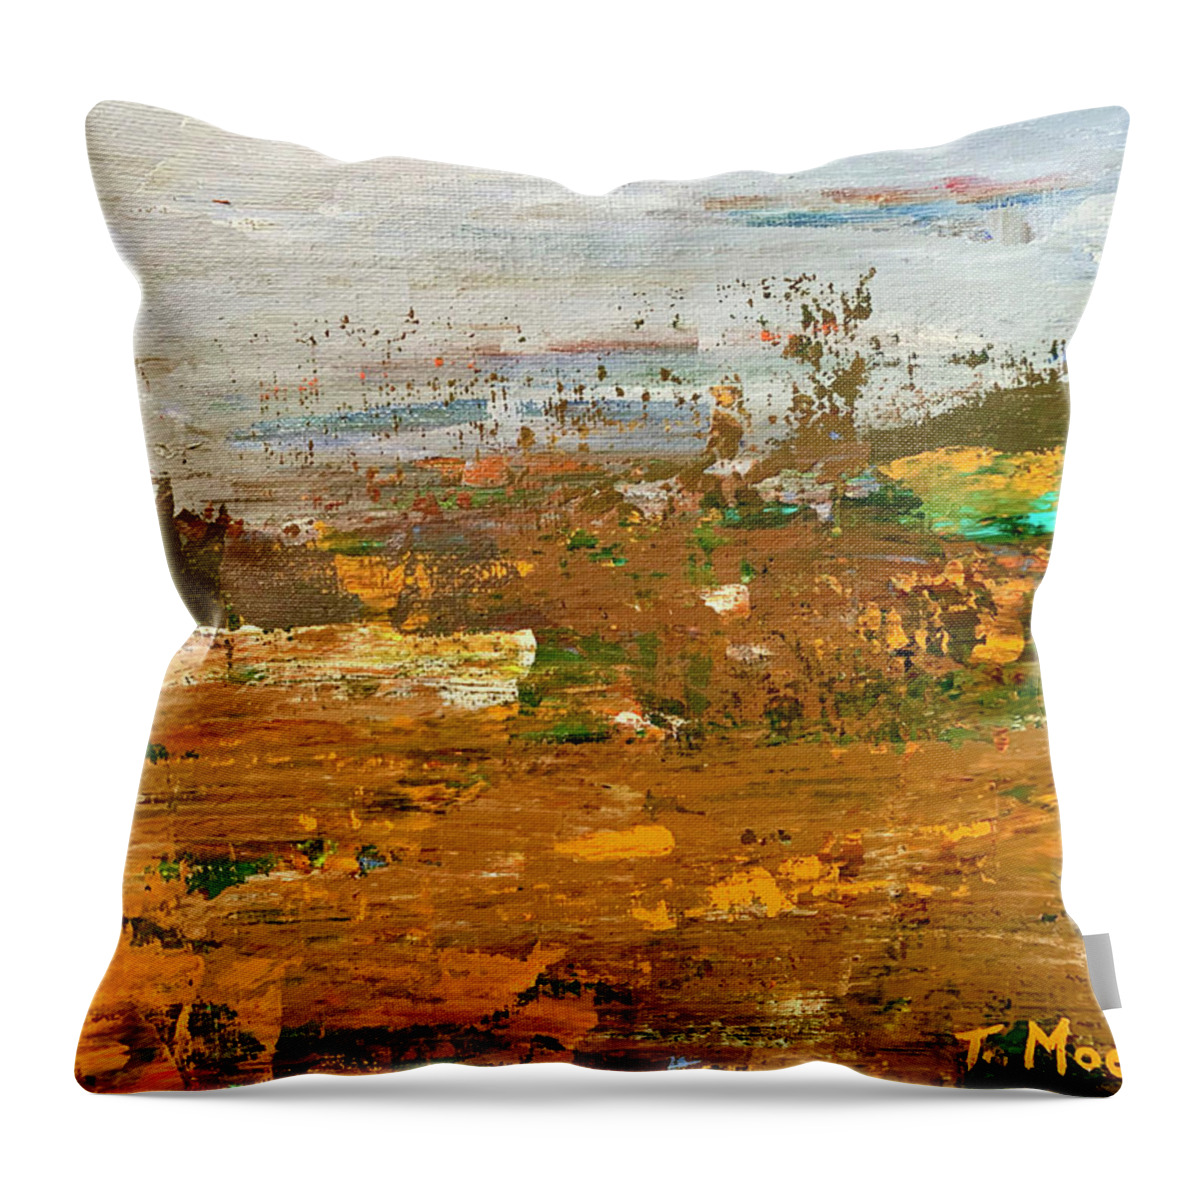 Landscape Throw Pillow featuring the painting Misty Meadow by Teresa Moerer